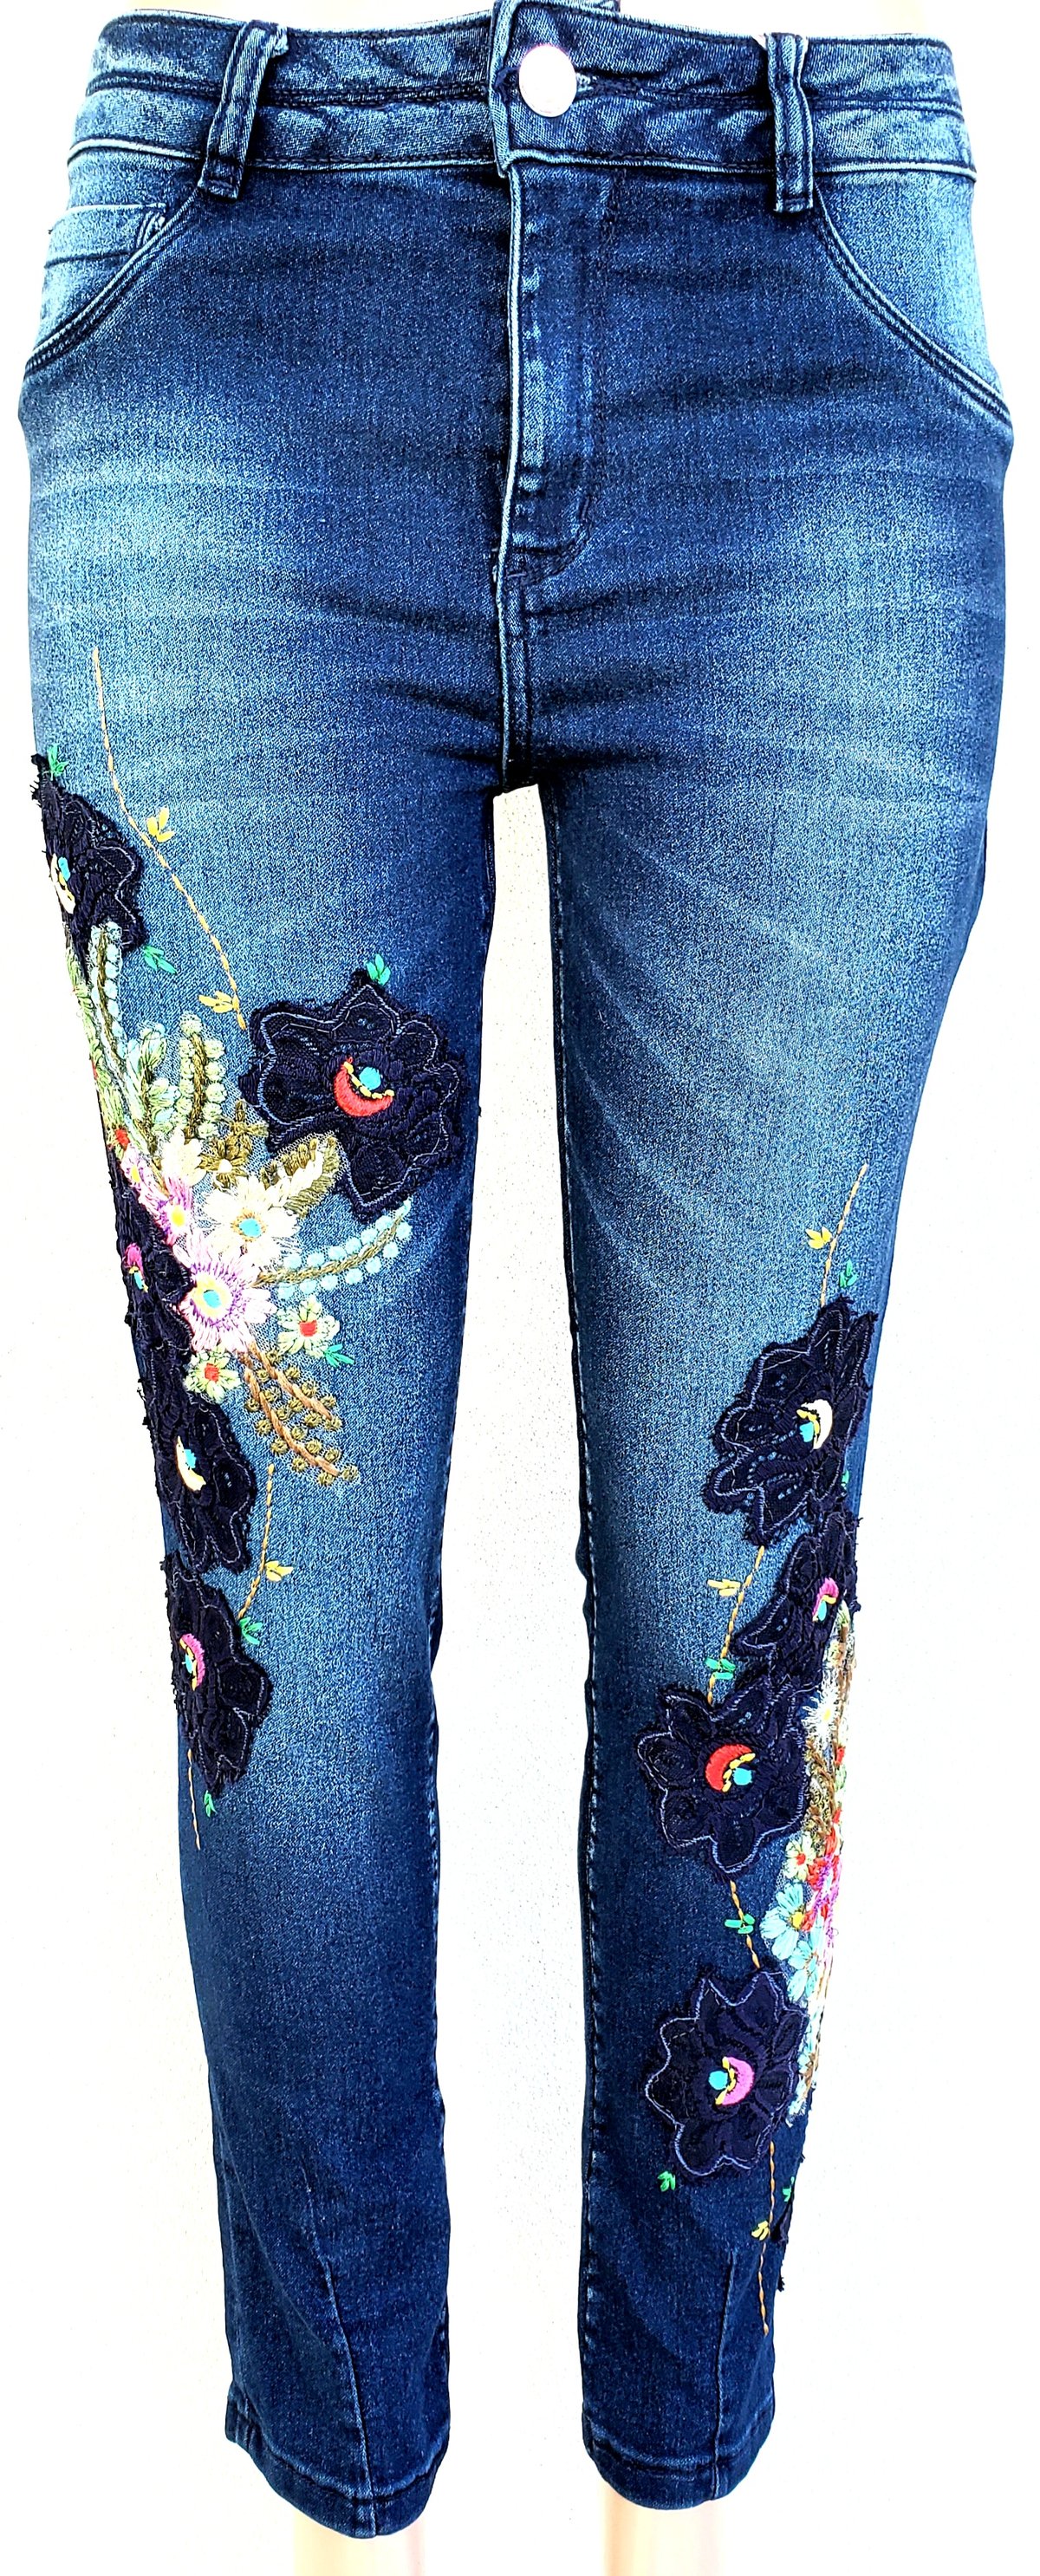 Blue jeans lace embroidery BR336